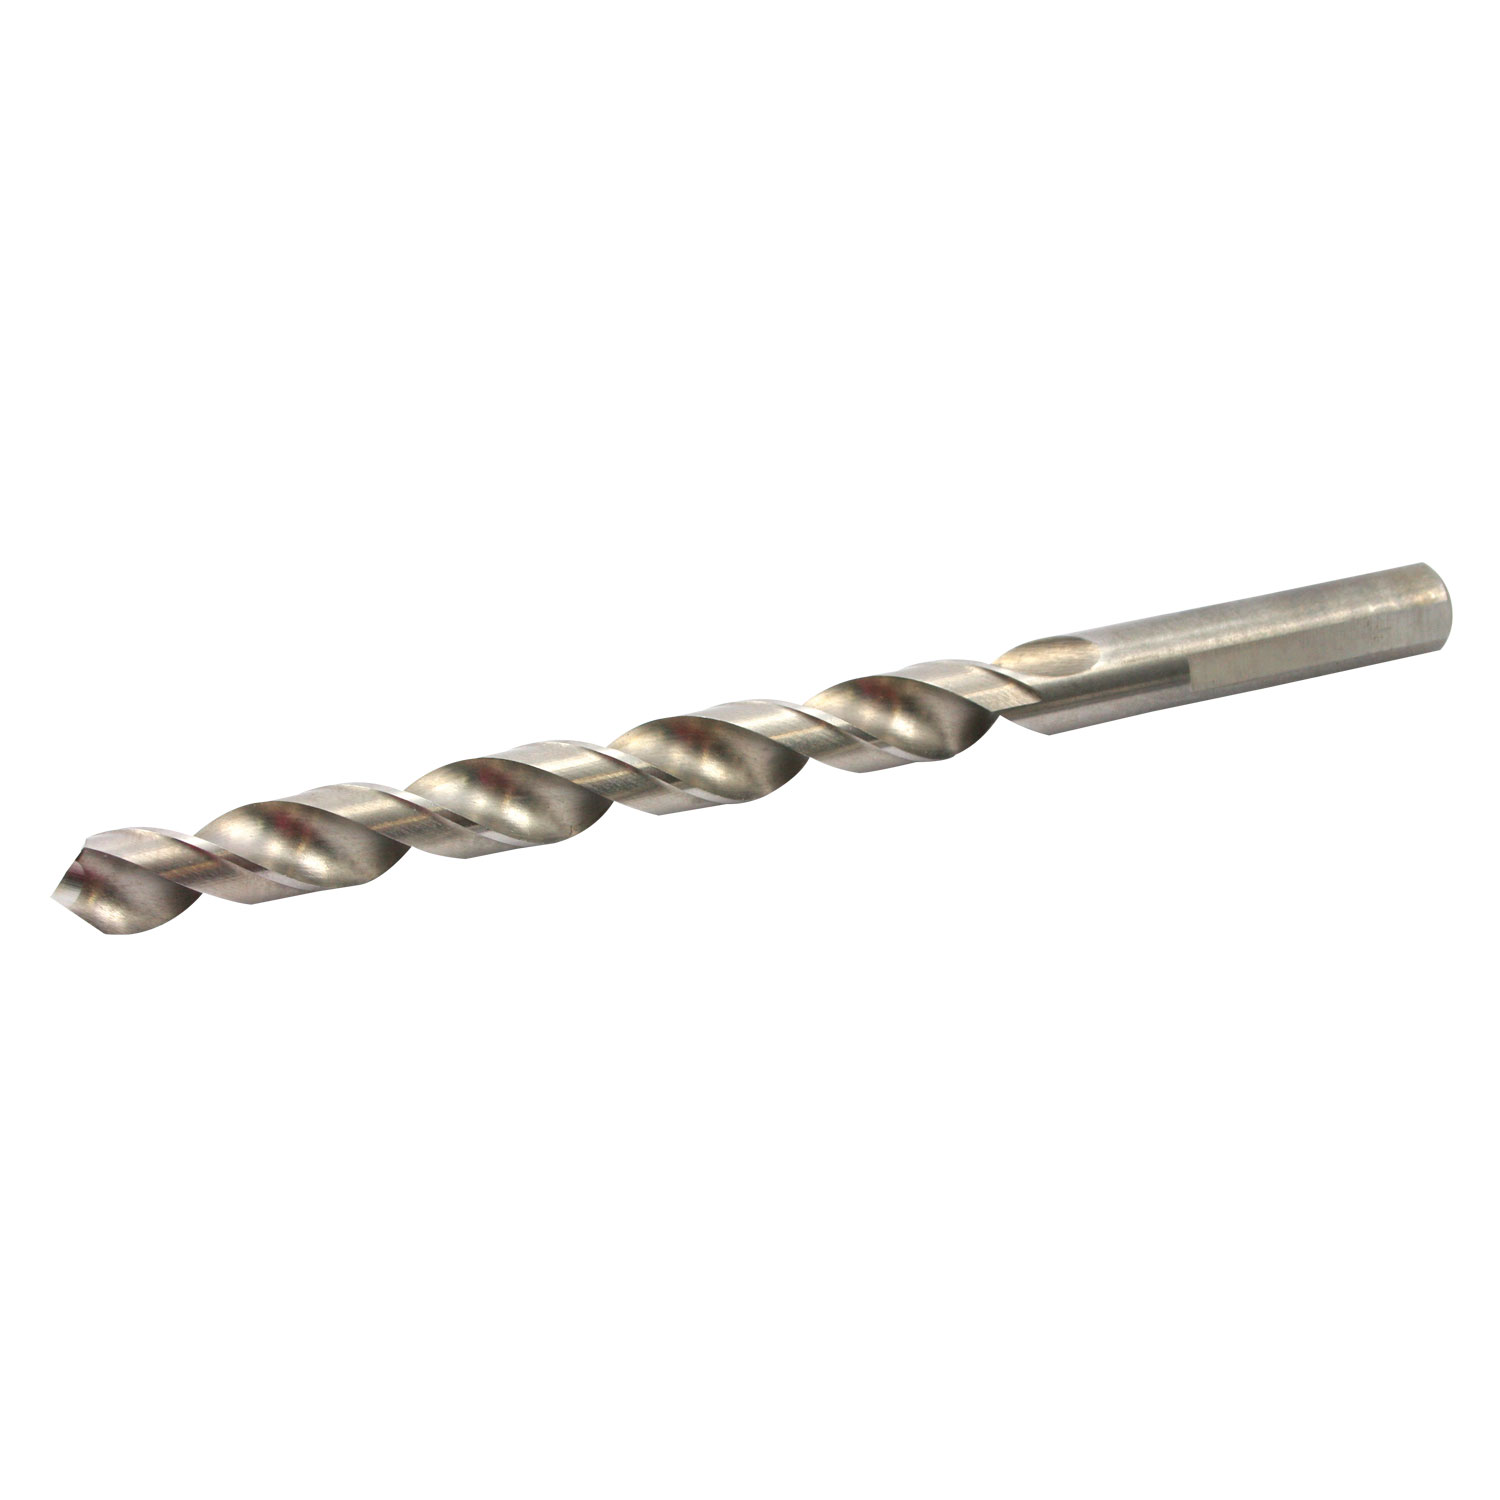 Tapping drill bit